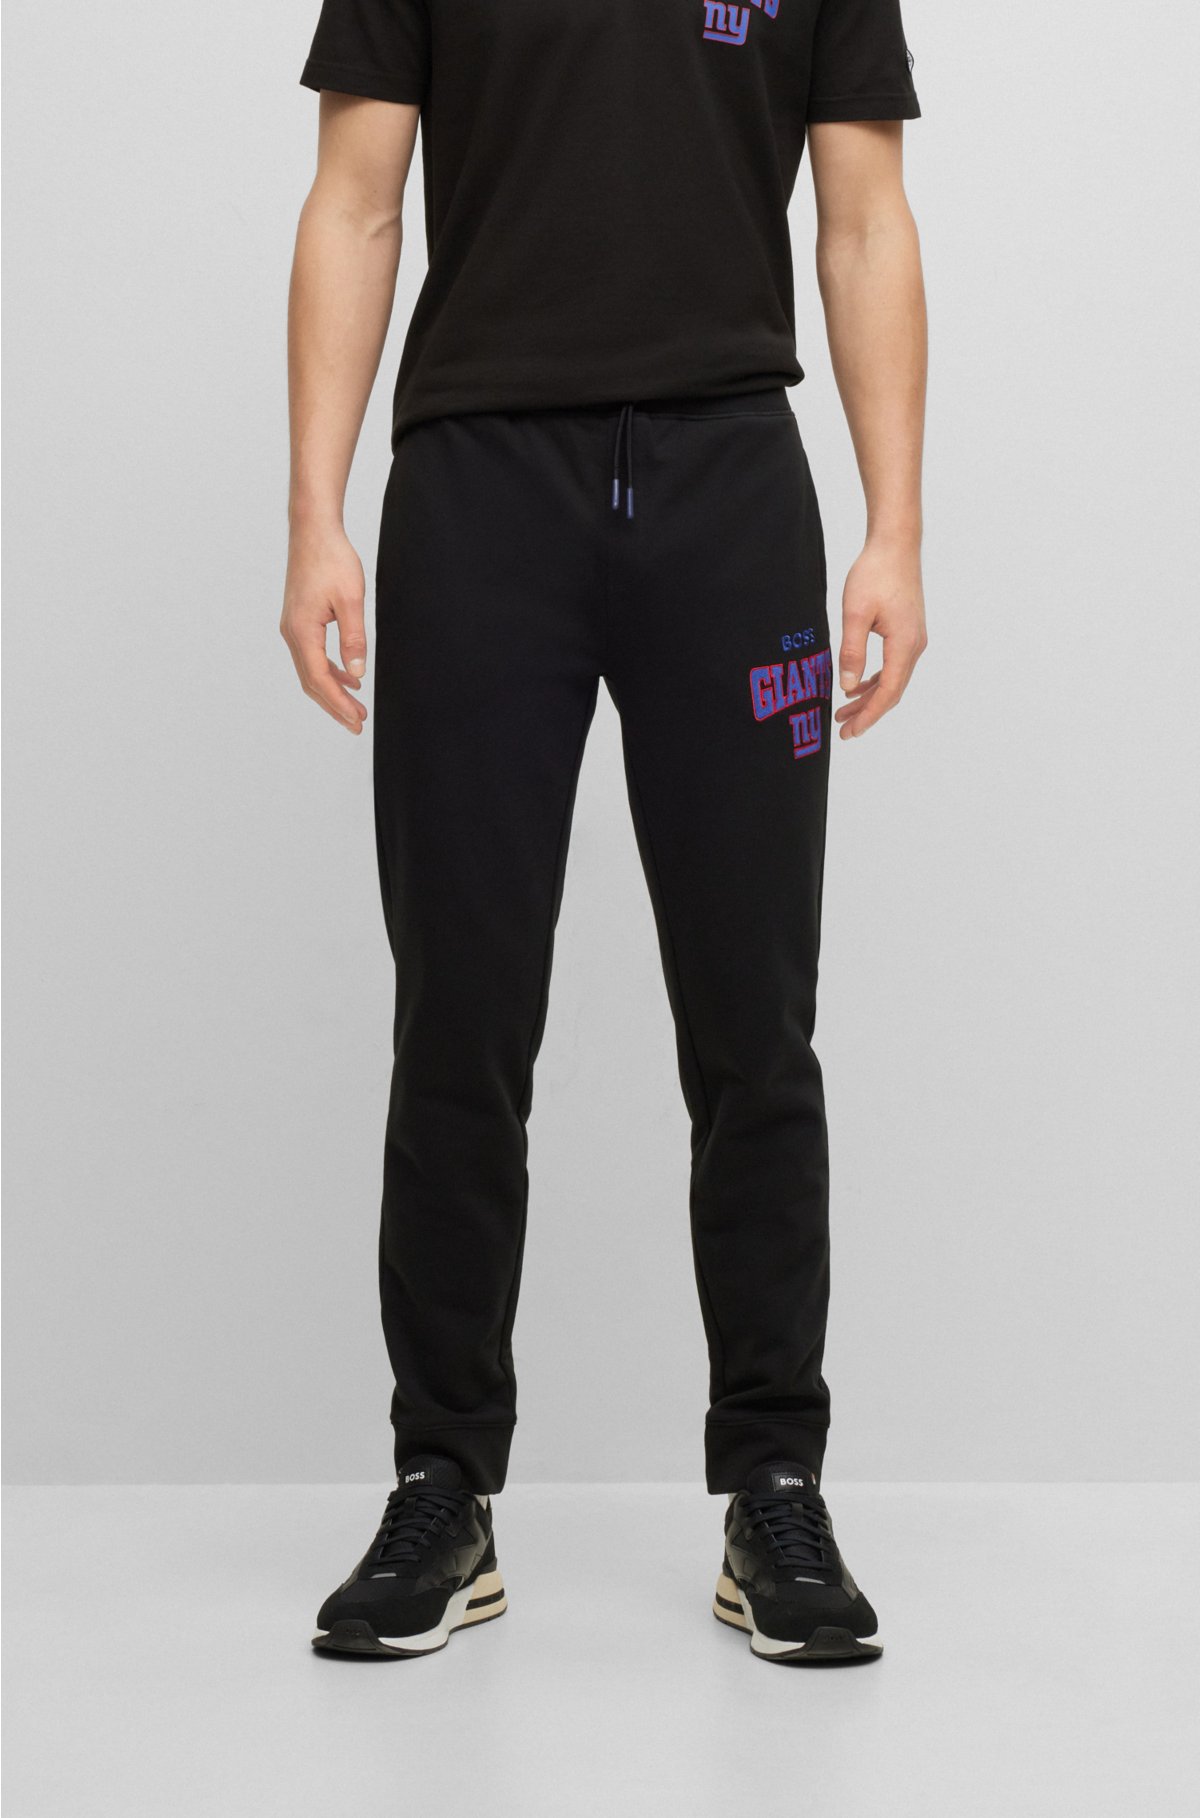 BOSS x NFL cotton-terry tracksuit bottoms with collaborative branding, Giants